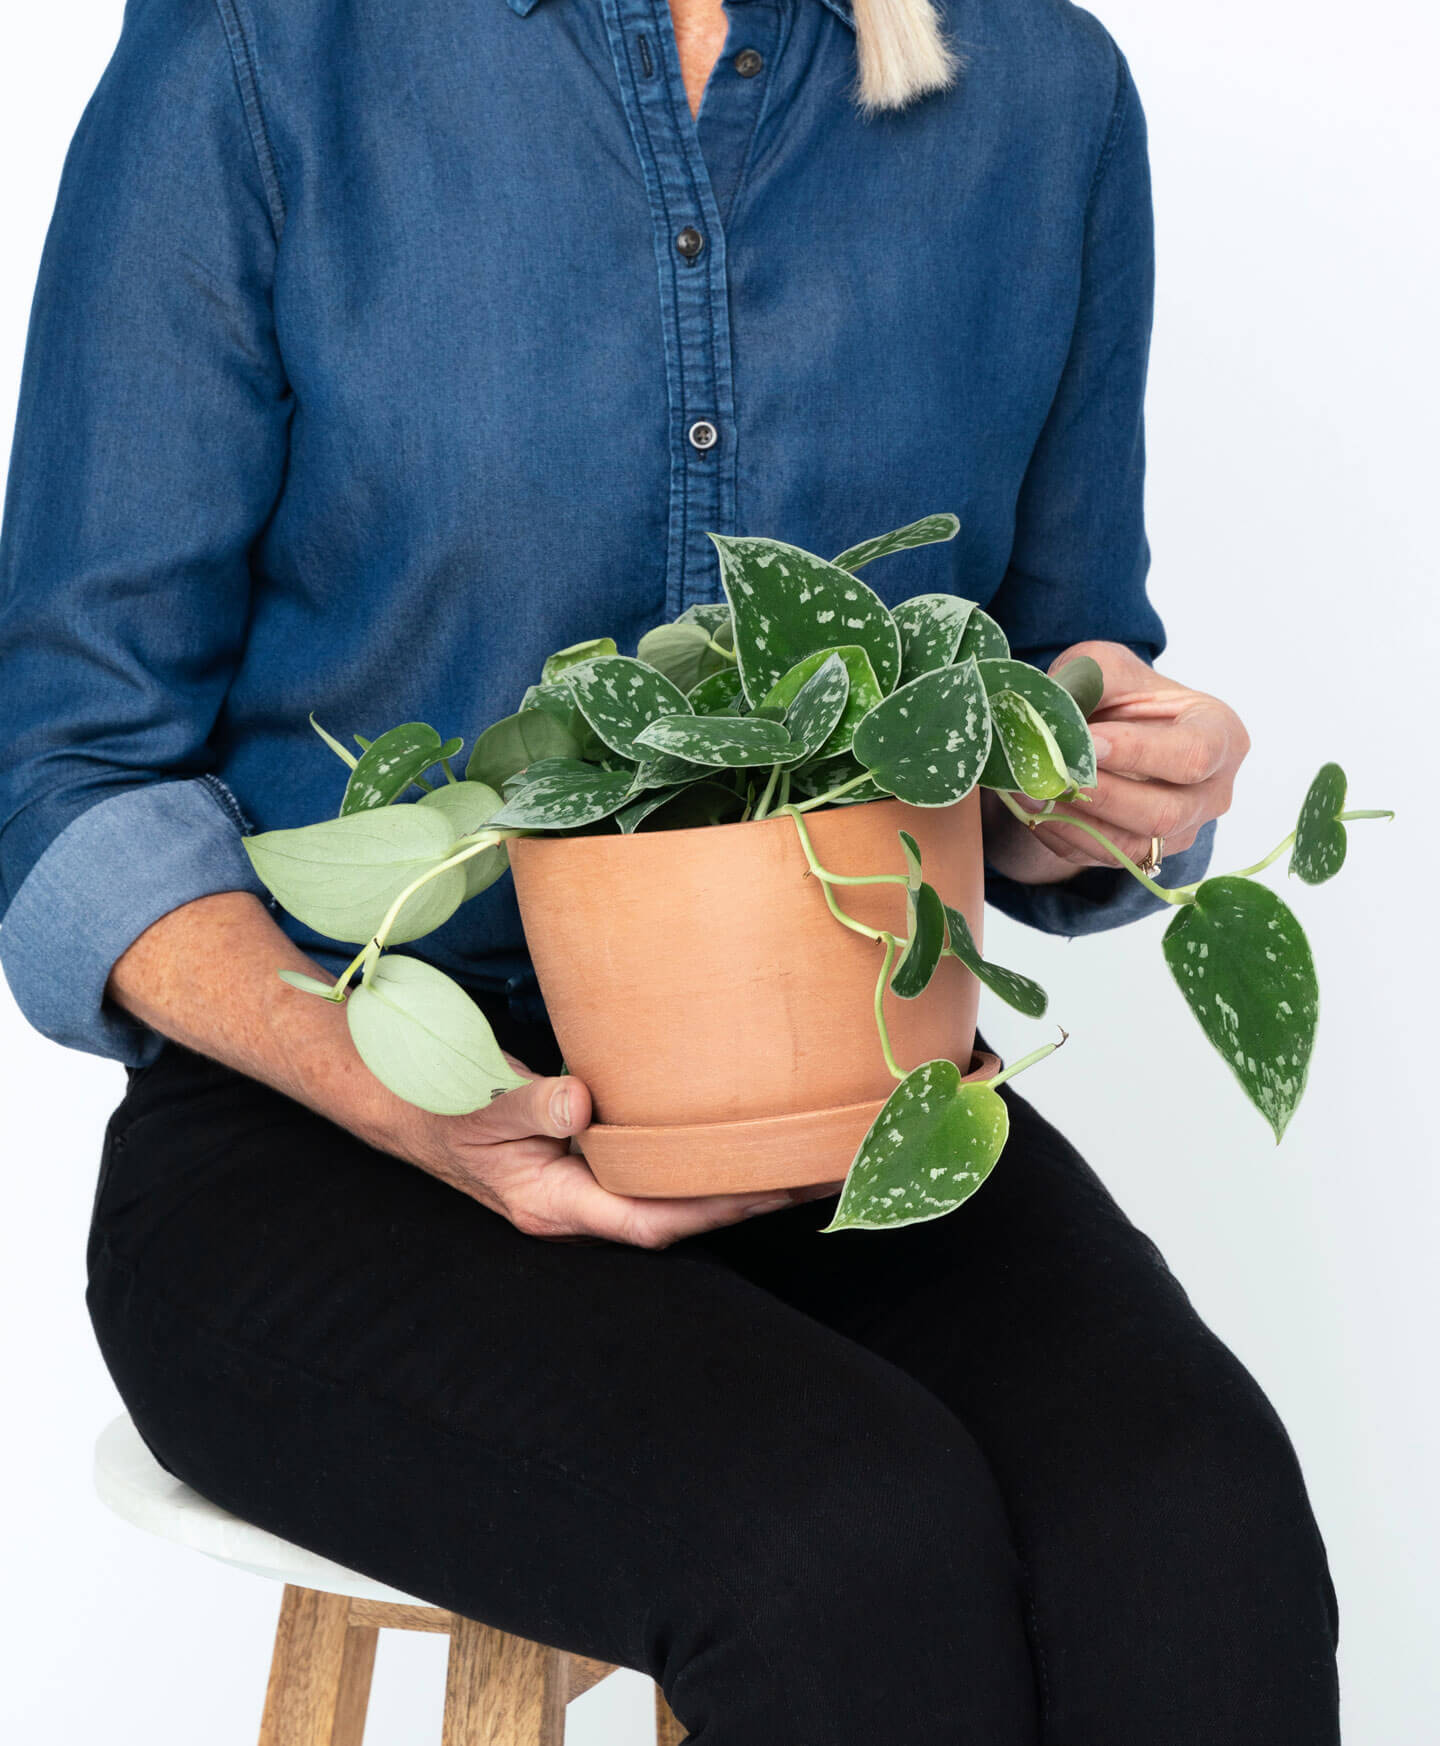 Pothos 101: How to Care for Pothos